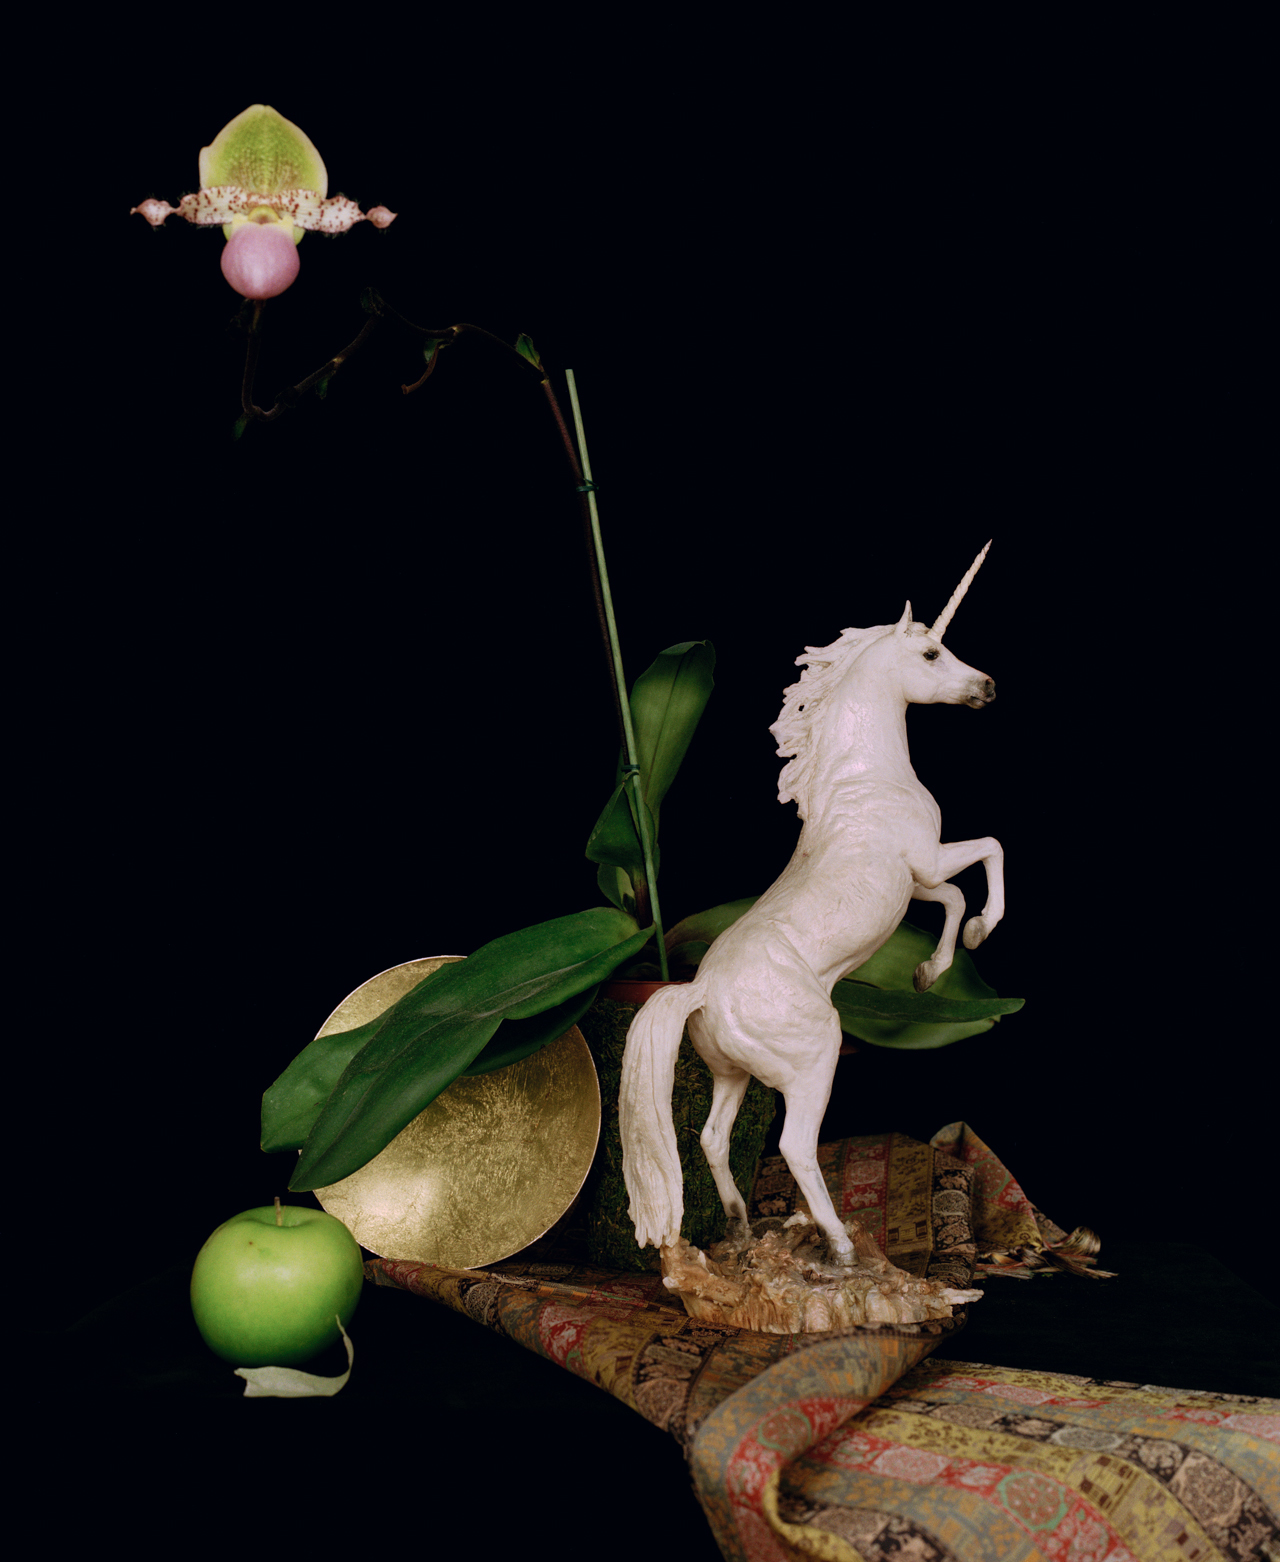 Still Life with an Orchid, a Green Apple and a Plaster Unicorn, London, 2014